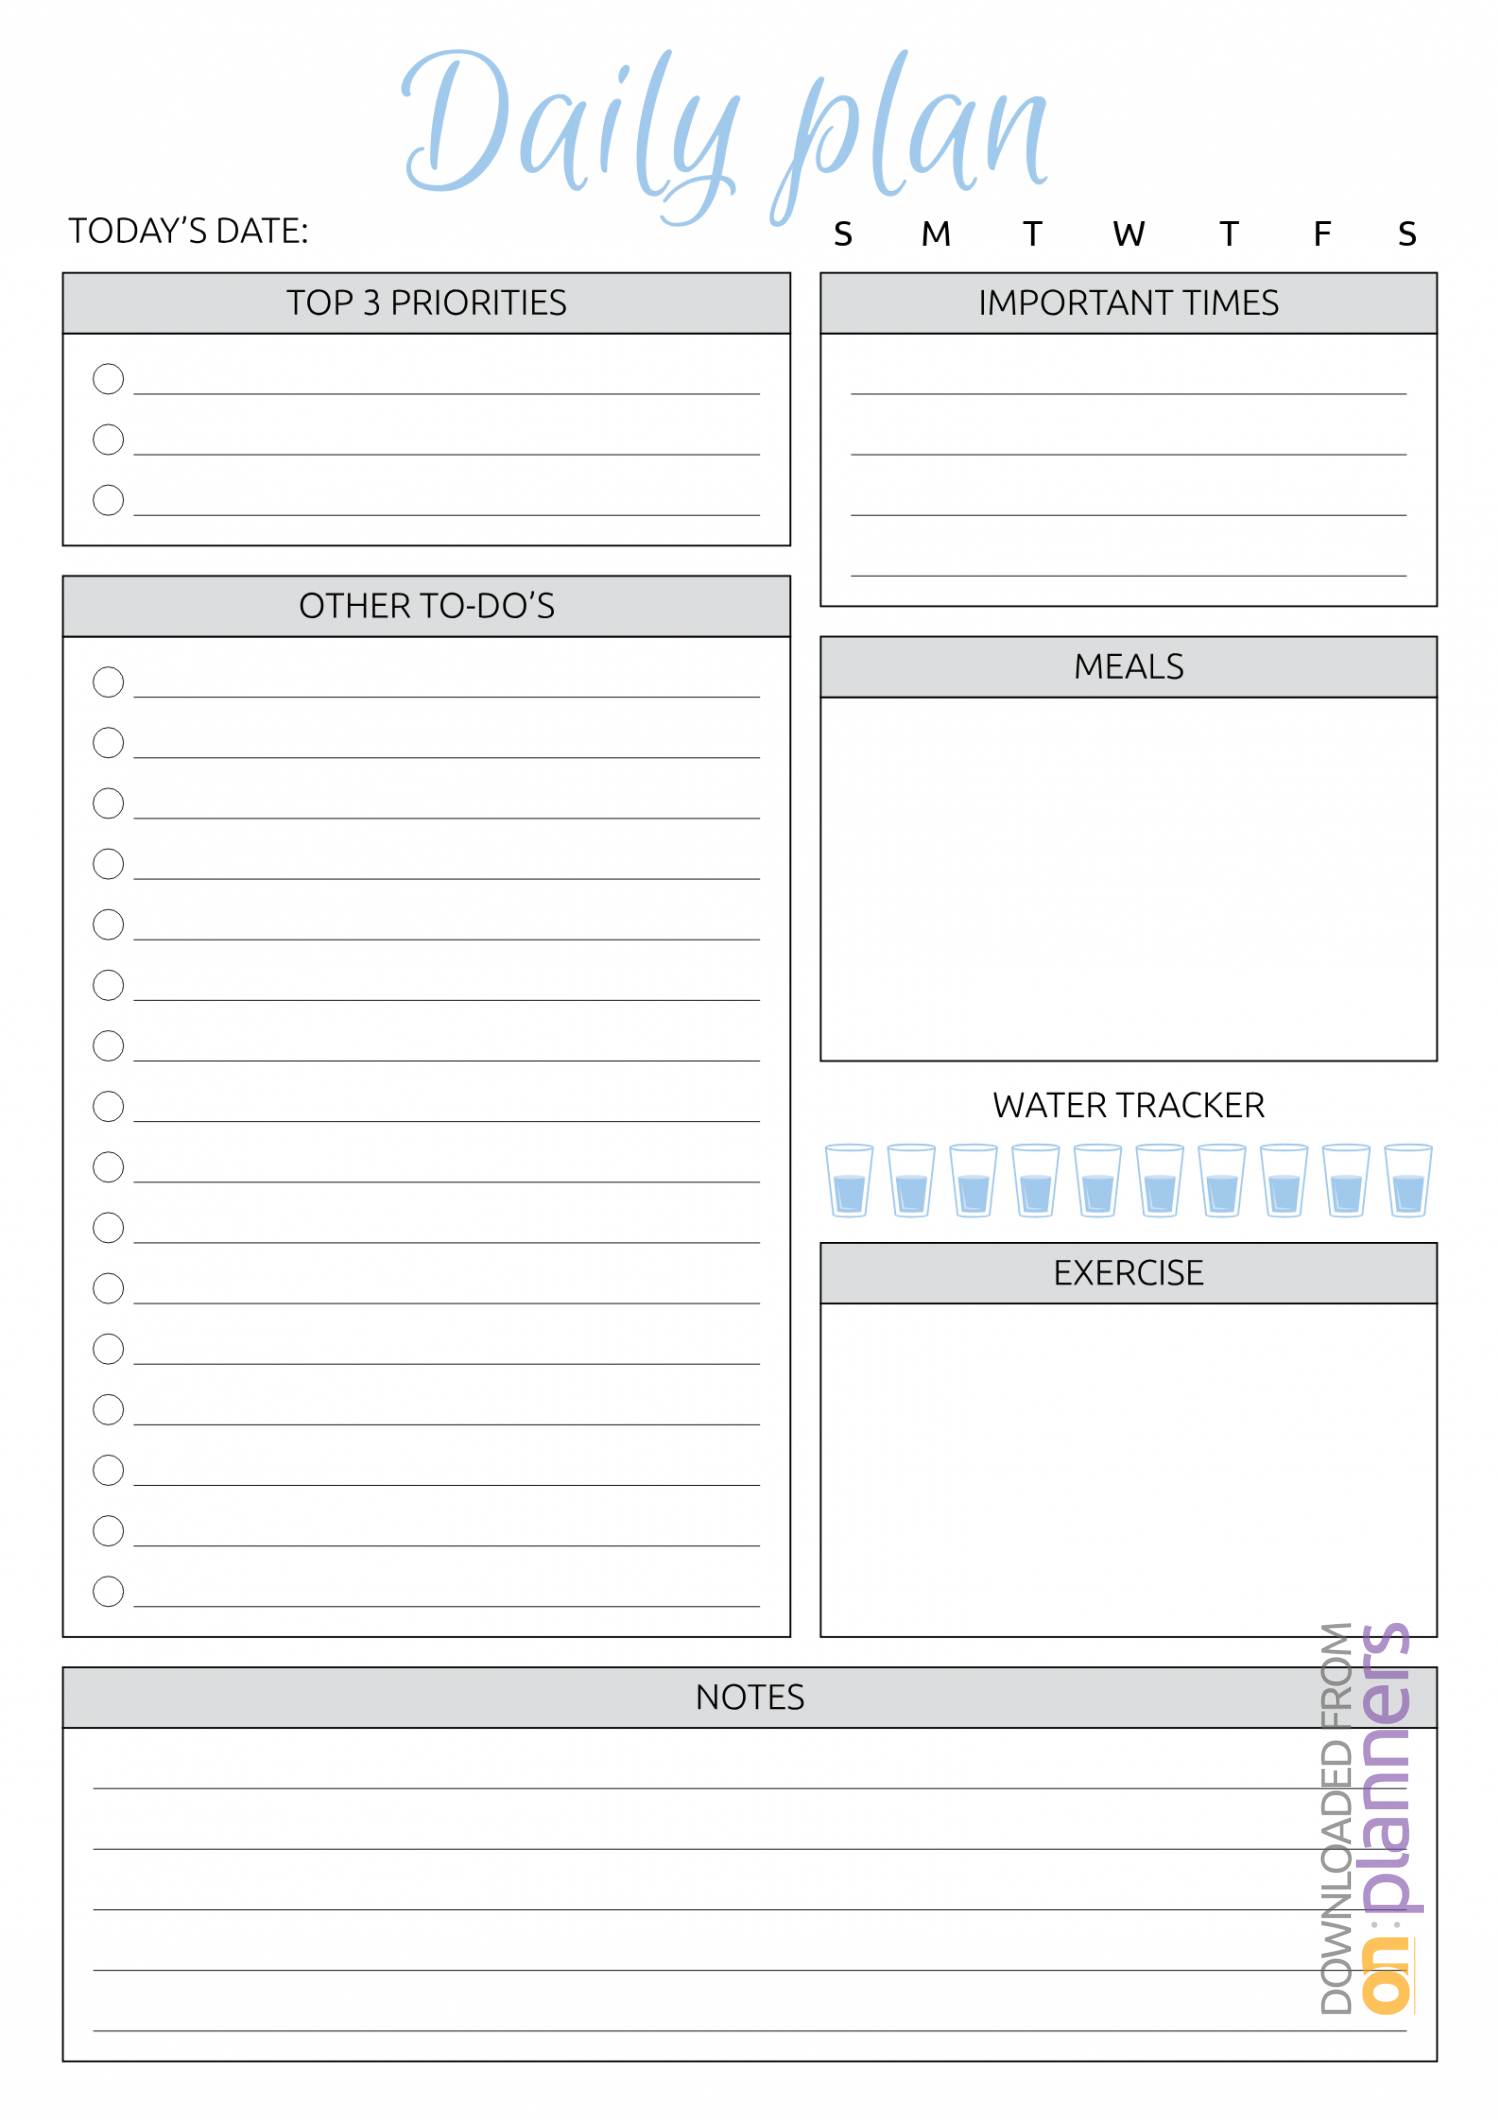 Download Printable Daily Plan With To Do List & Important Intended For Blank To Do List Template